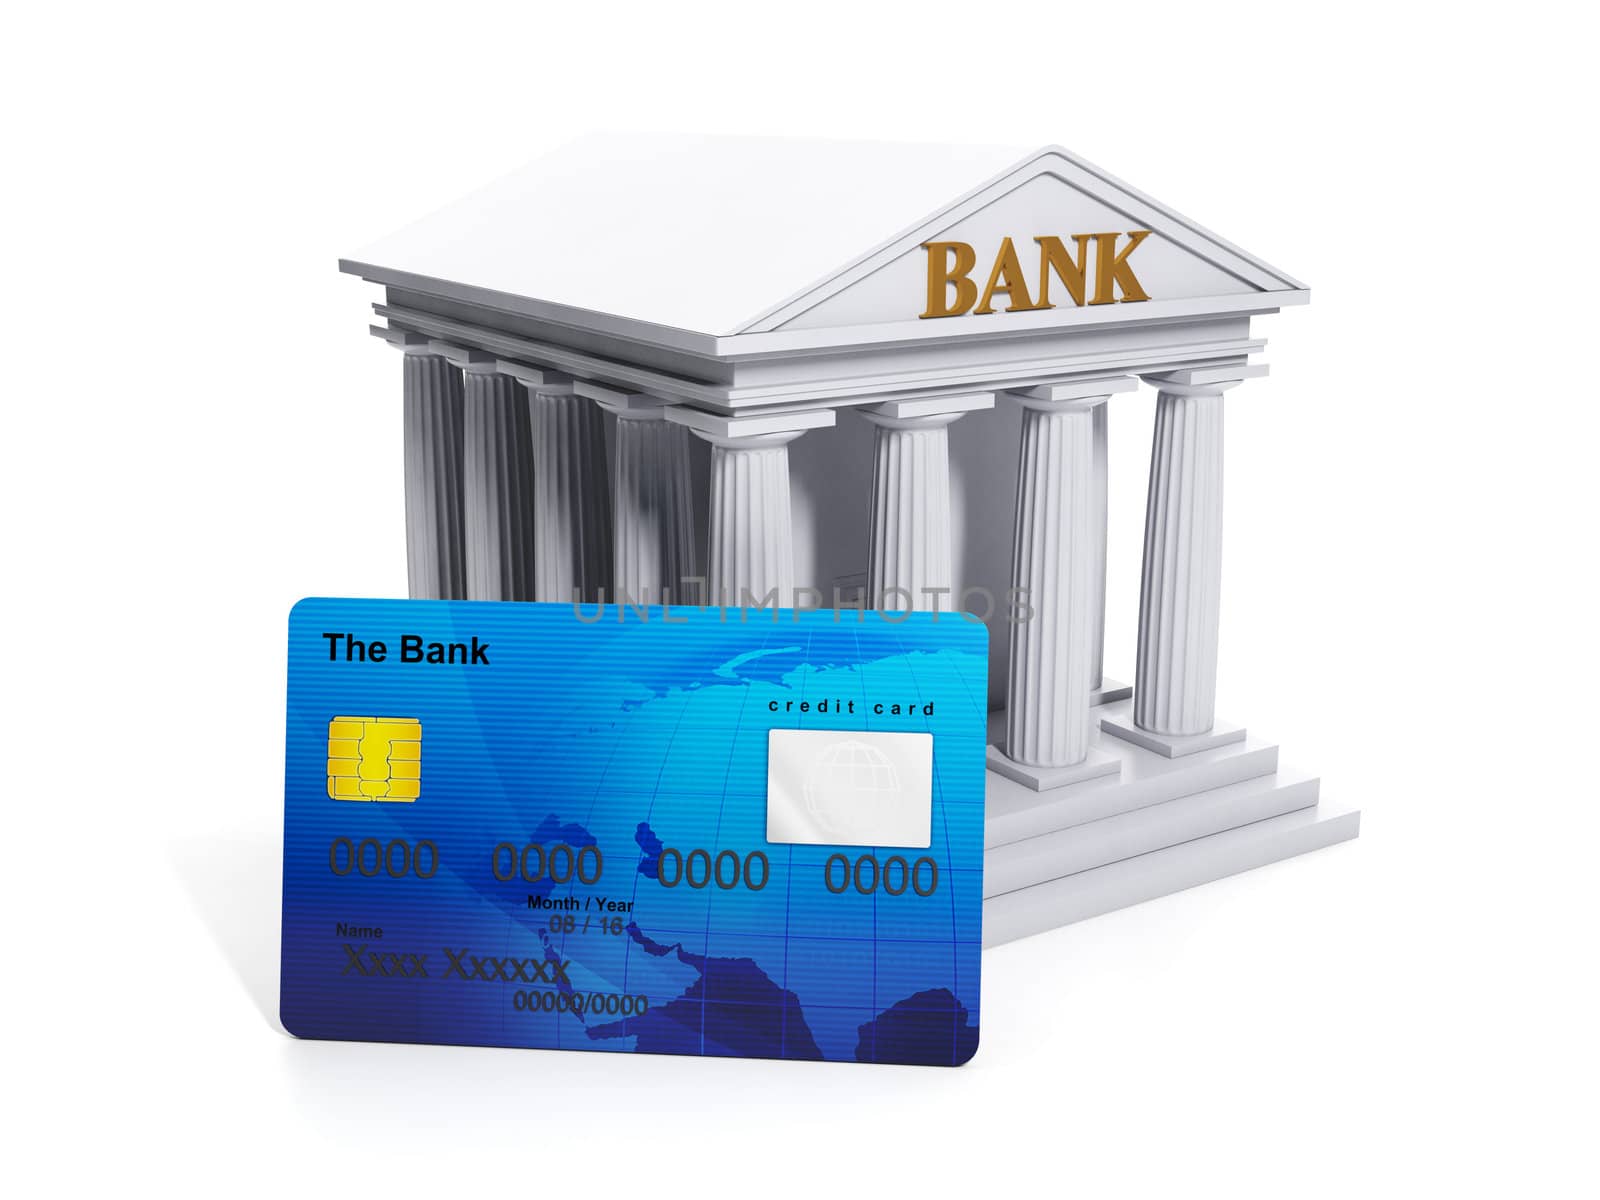 The symbol of the bank. Credit card and bank close-up on white background